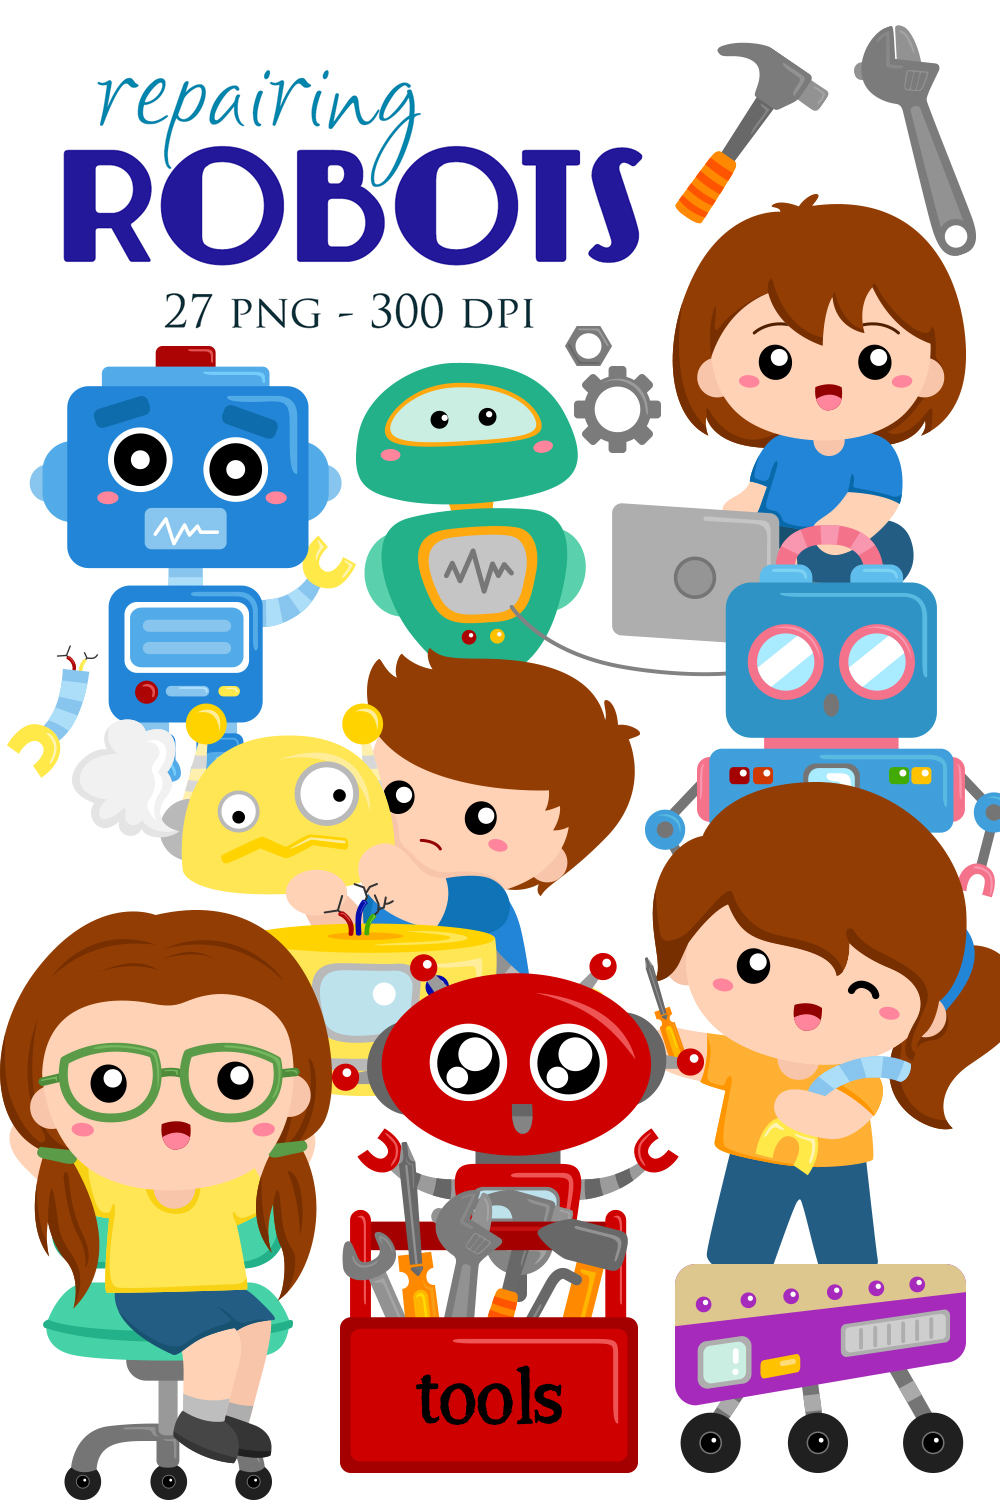 Repairing Robot Engineer Vector Clipart Illustrations pinterest preview image.